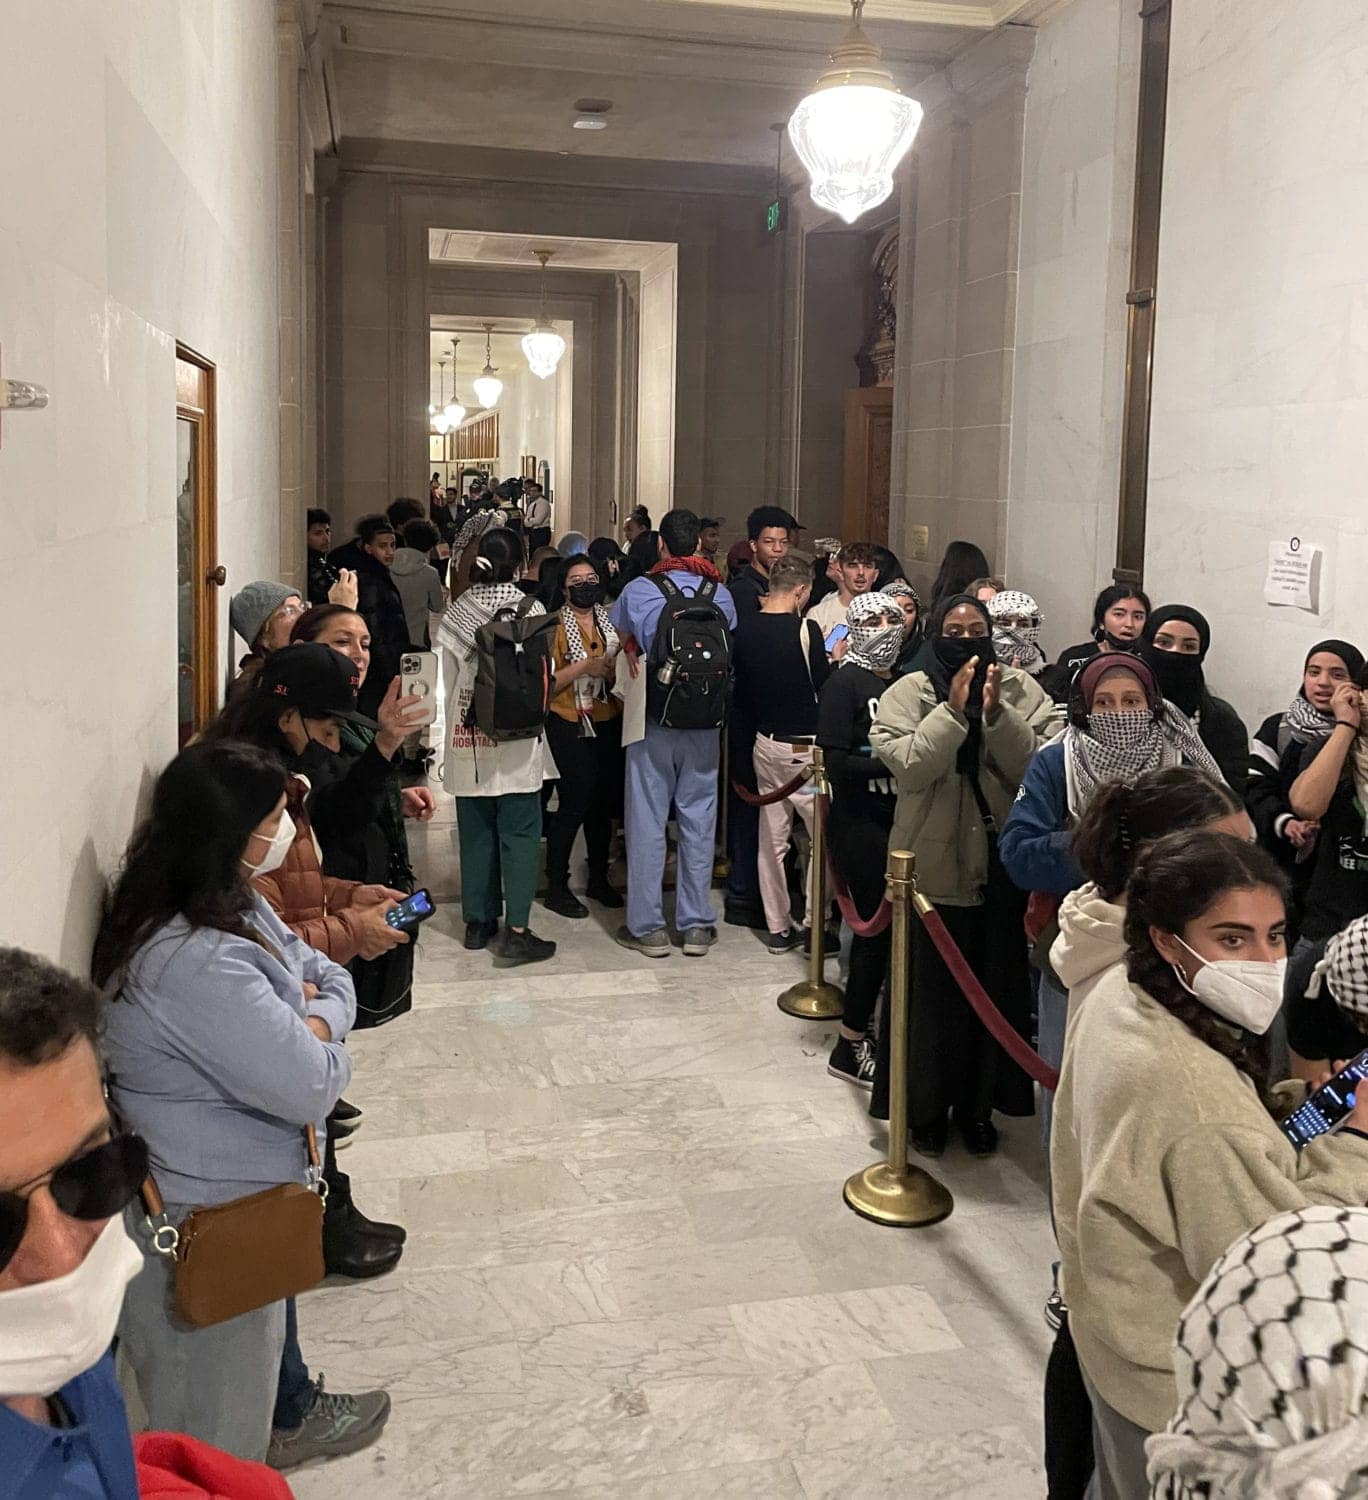 Overflow-crowd-outside-SF-Board-chambers-testimony-on-Gaza-ceasefire-resolution-120523-by-Kia-Walton-1, Supervisor Preston calls for Gaza ceasefire, City Hall swells with support, Featured Local News & Views 